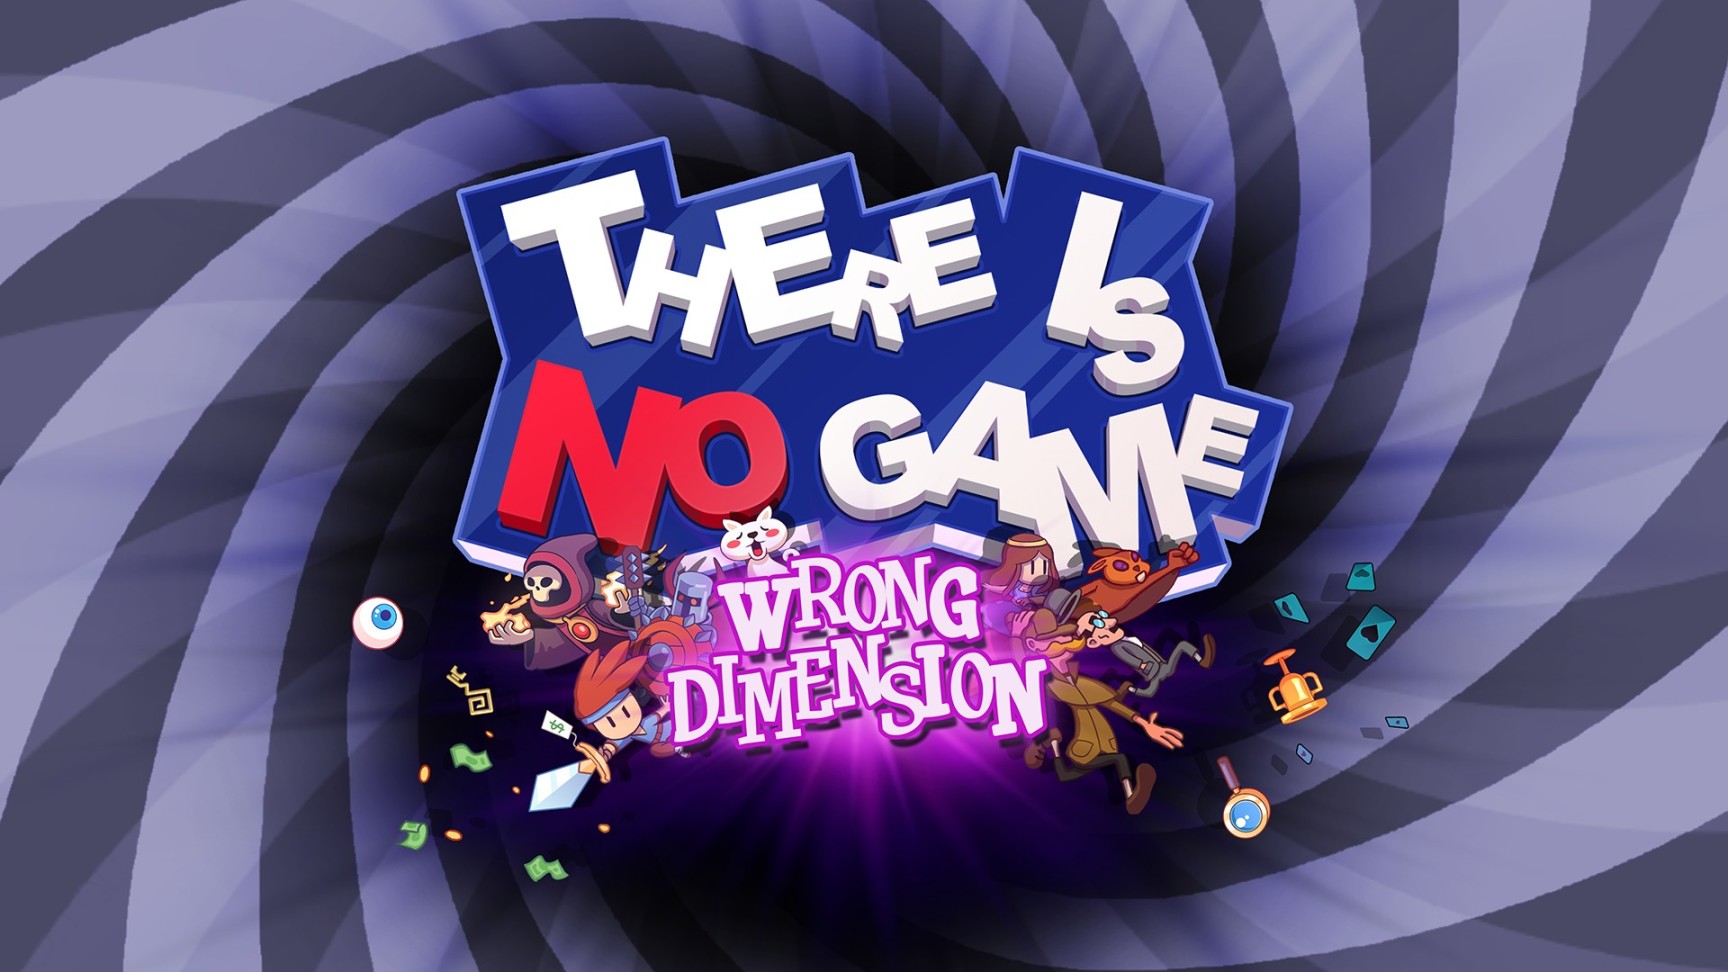 《There Is No Game : Wrong Dimension》：一封献给玩家与游戏制作者的情书-第1张